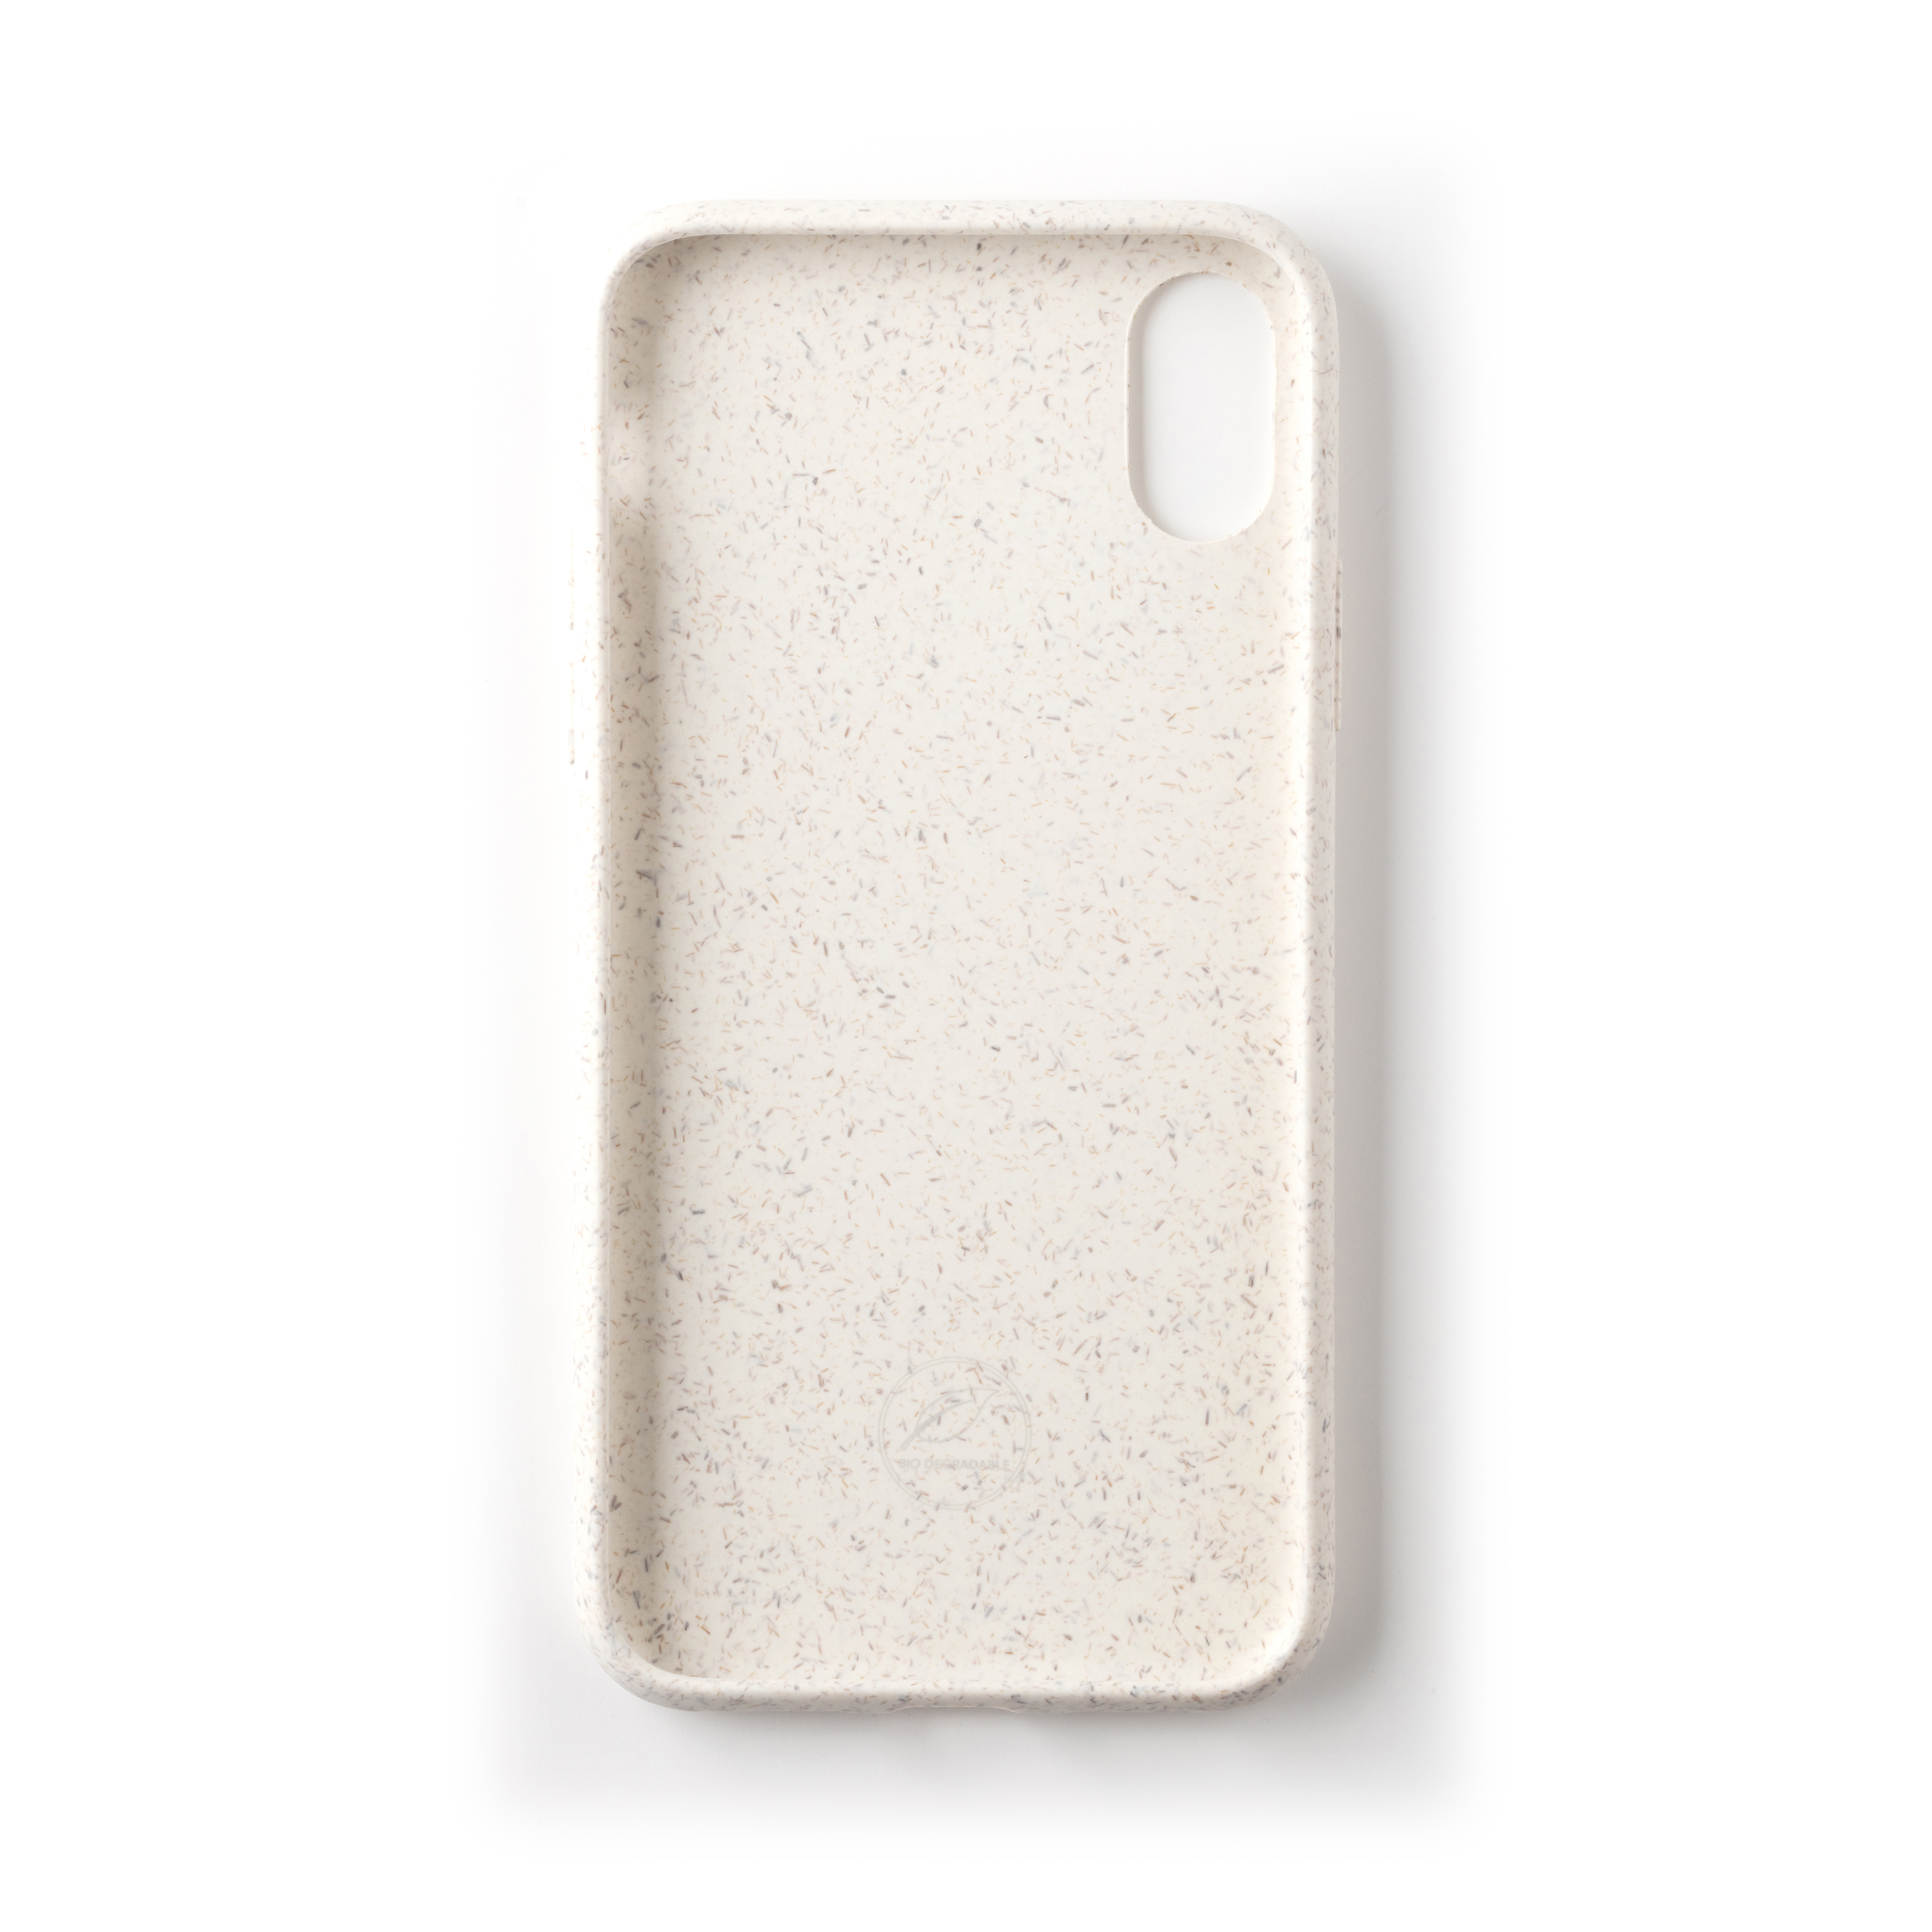 RIPXS, FASHION WILMA X/XS, BY iPhone Apple, ECO white Backcover,